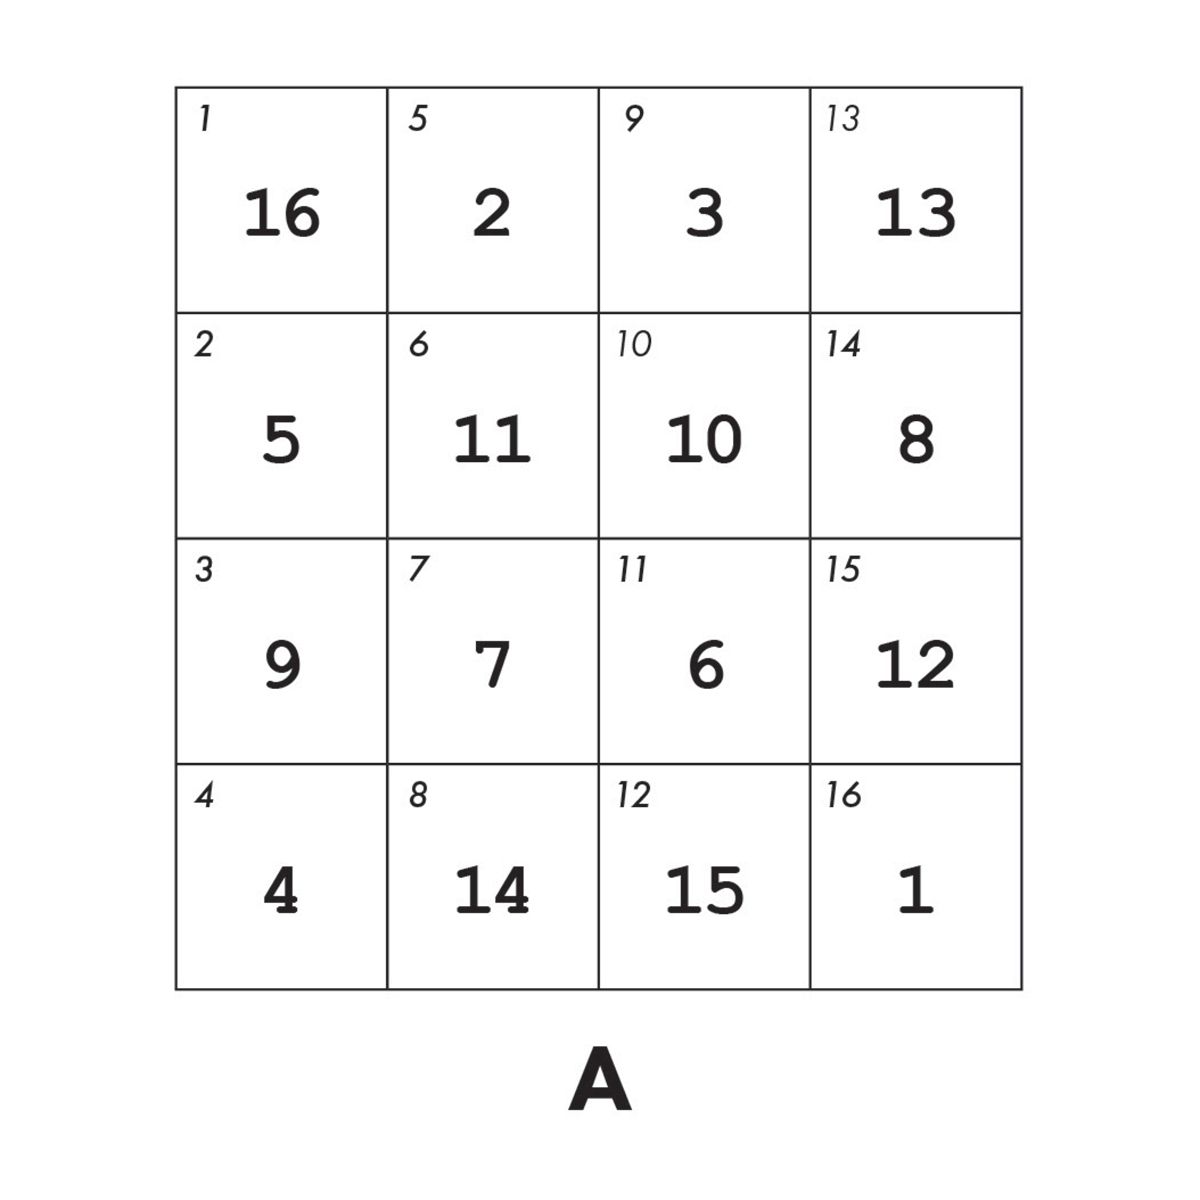 Original 4x4 matrix A that has a subscript in the top left corner of each box, indicating the position or order of each box from 1 through 16 sequentially.